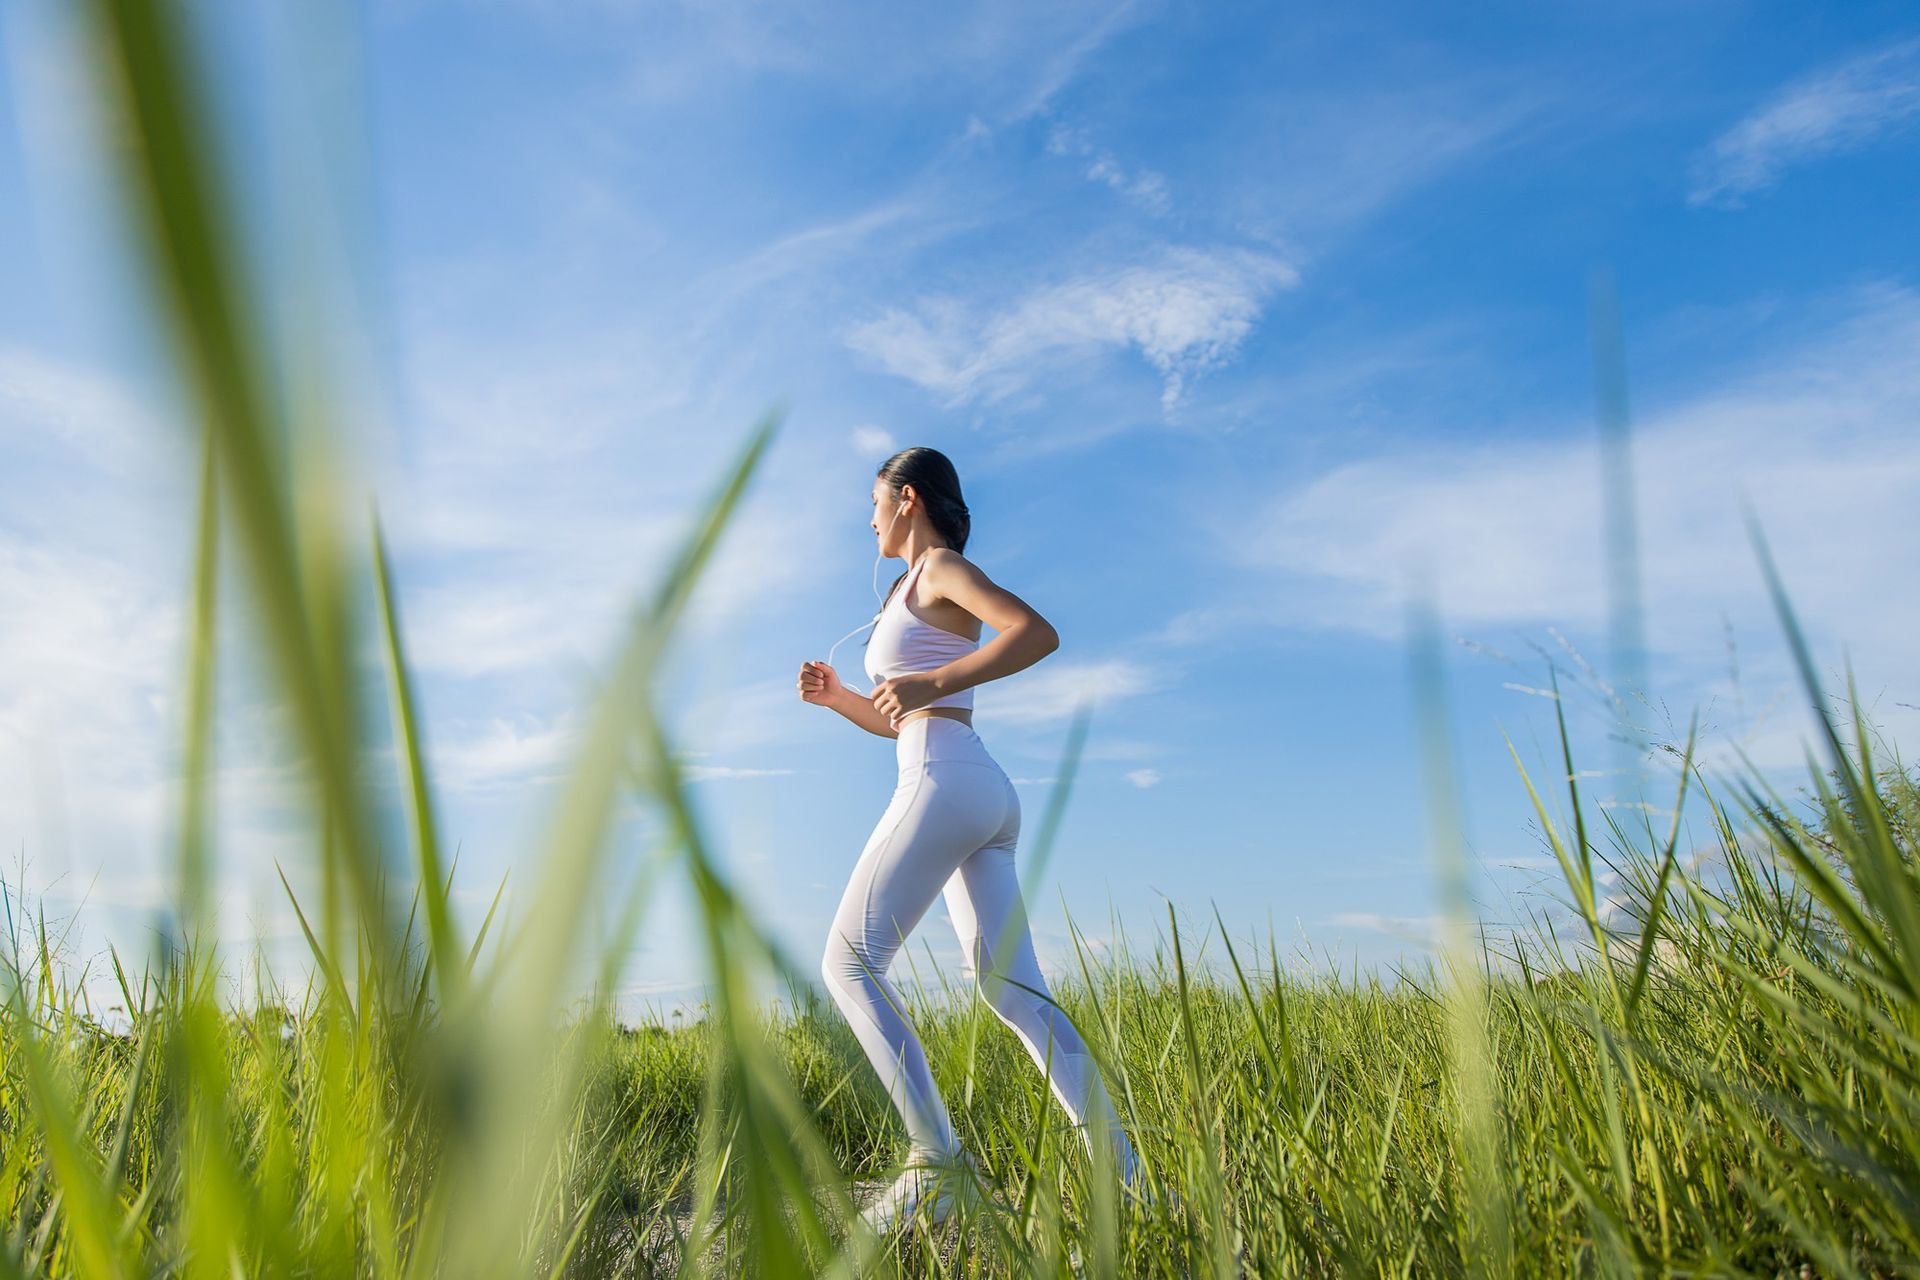 a woman in white running through a grassy field